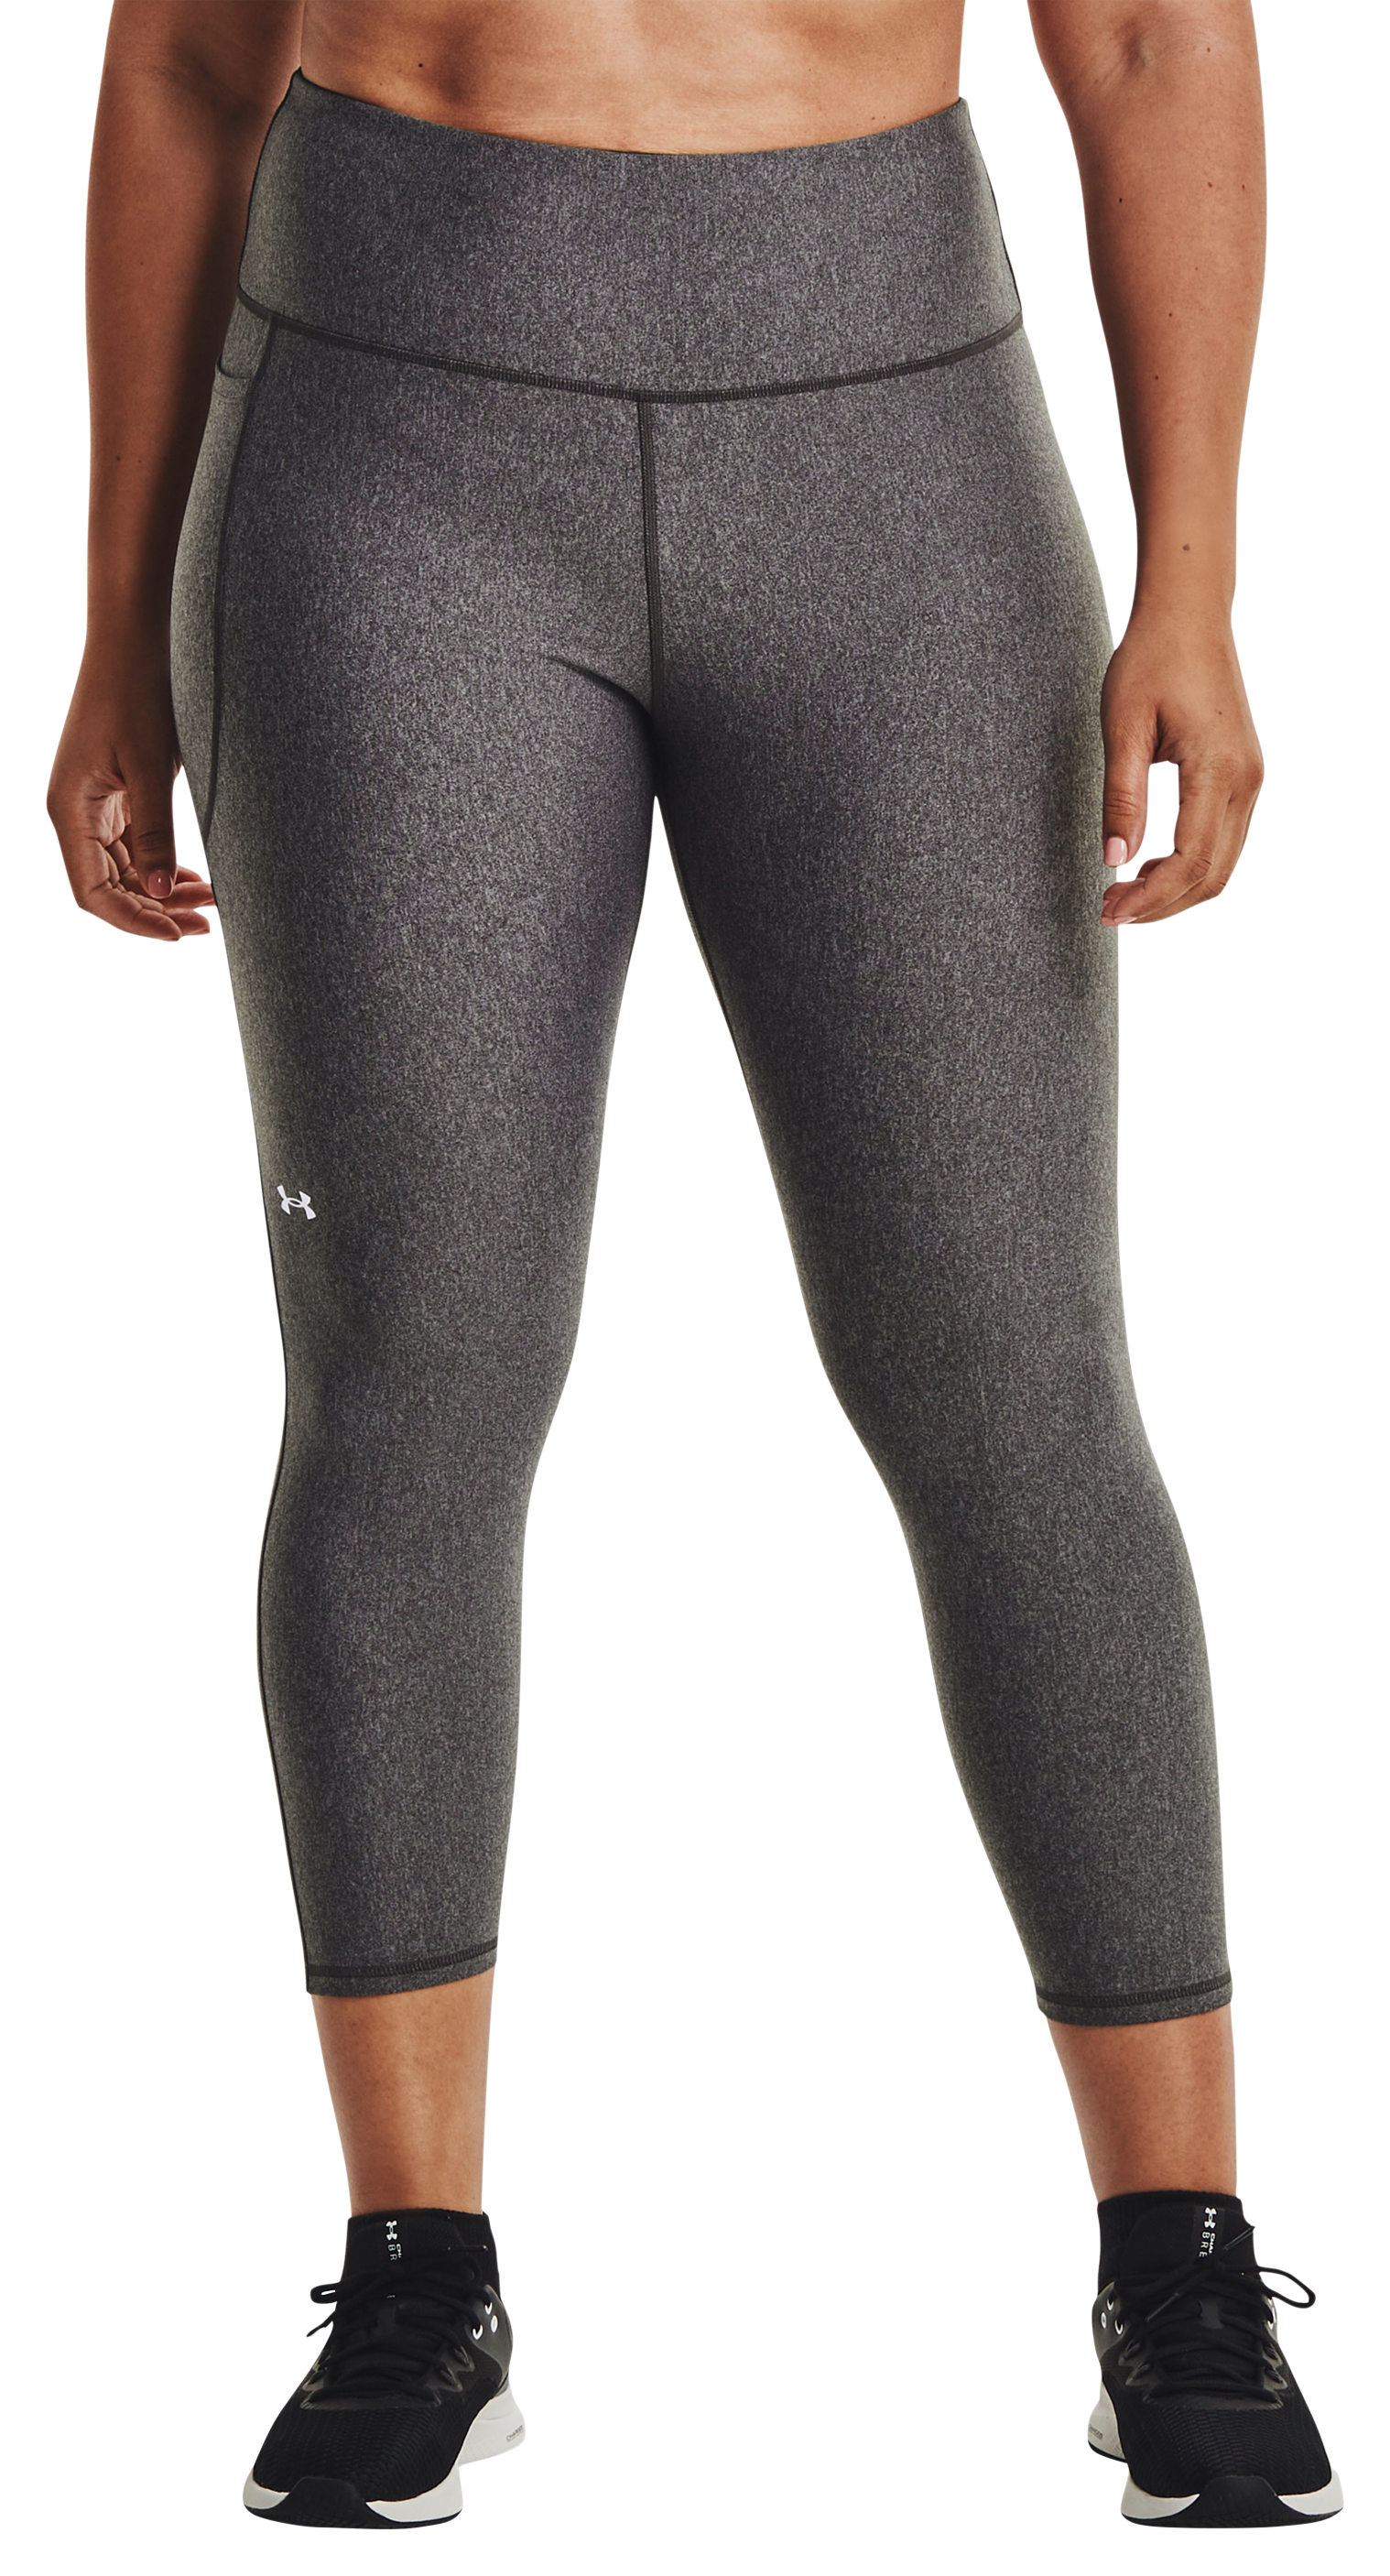 Under Armour HeatGear Armour No-Slip Waistband Ankle Leggings for Ladies - Charcoal Light Heather/White - XS - Short